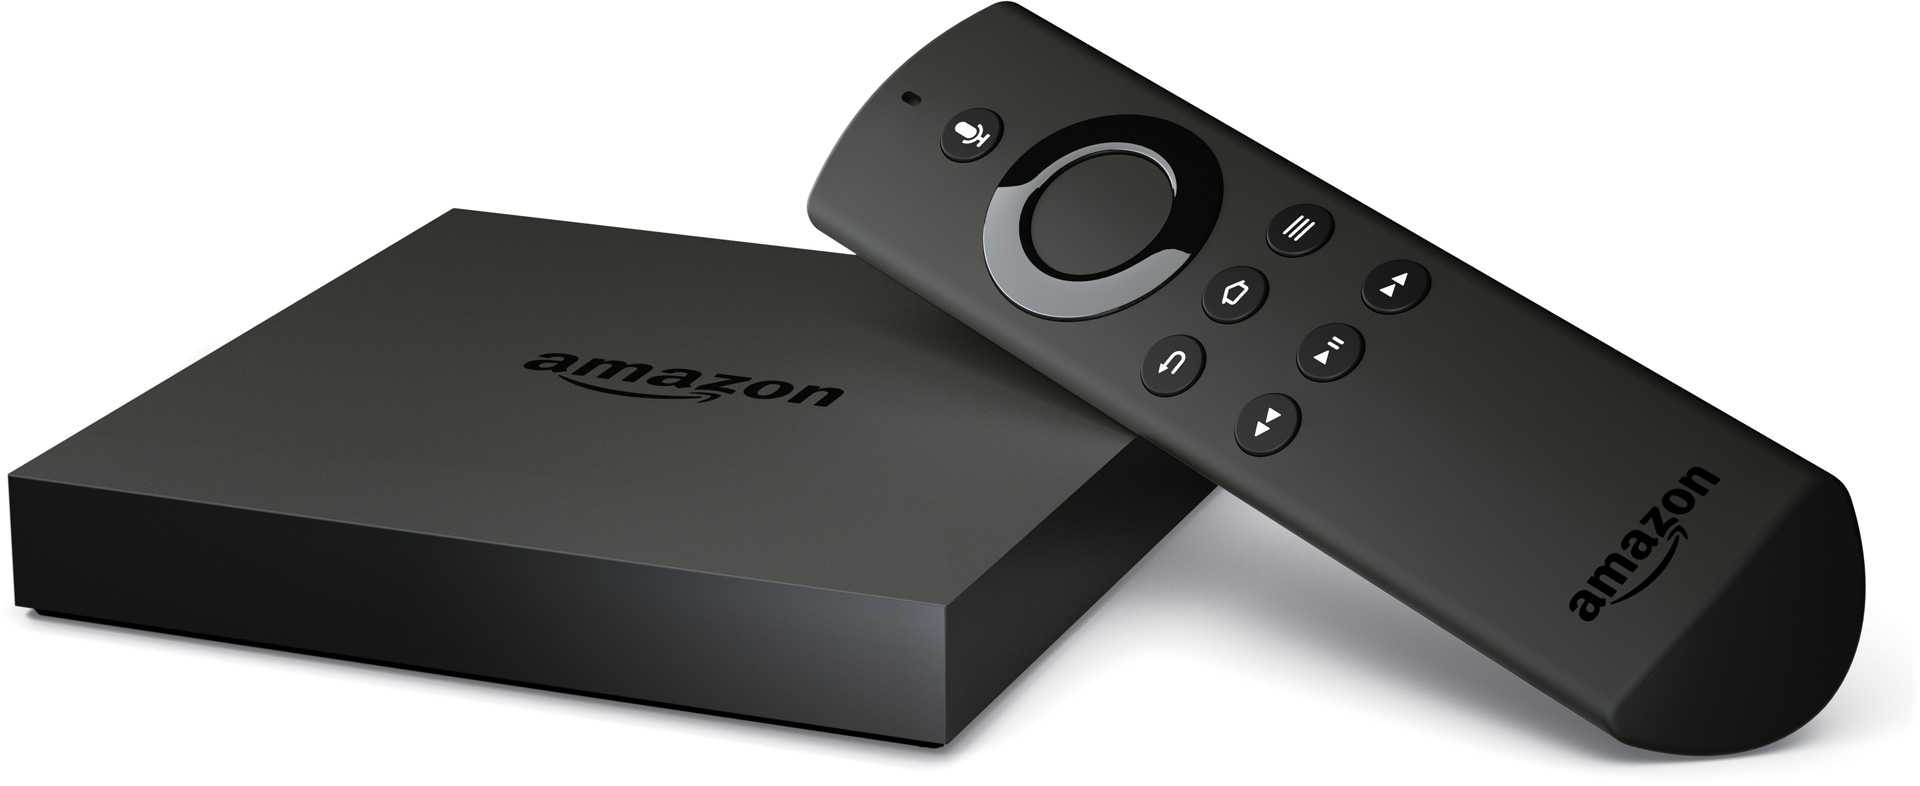 Amazon should stop selling Apple TV because it does not support Prime Video [atualizado]